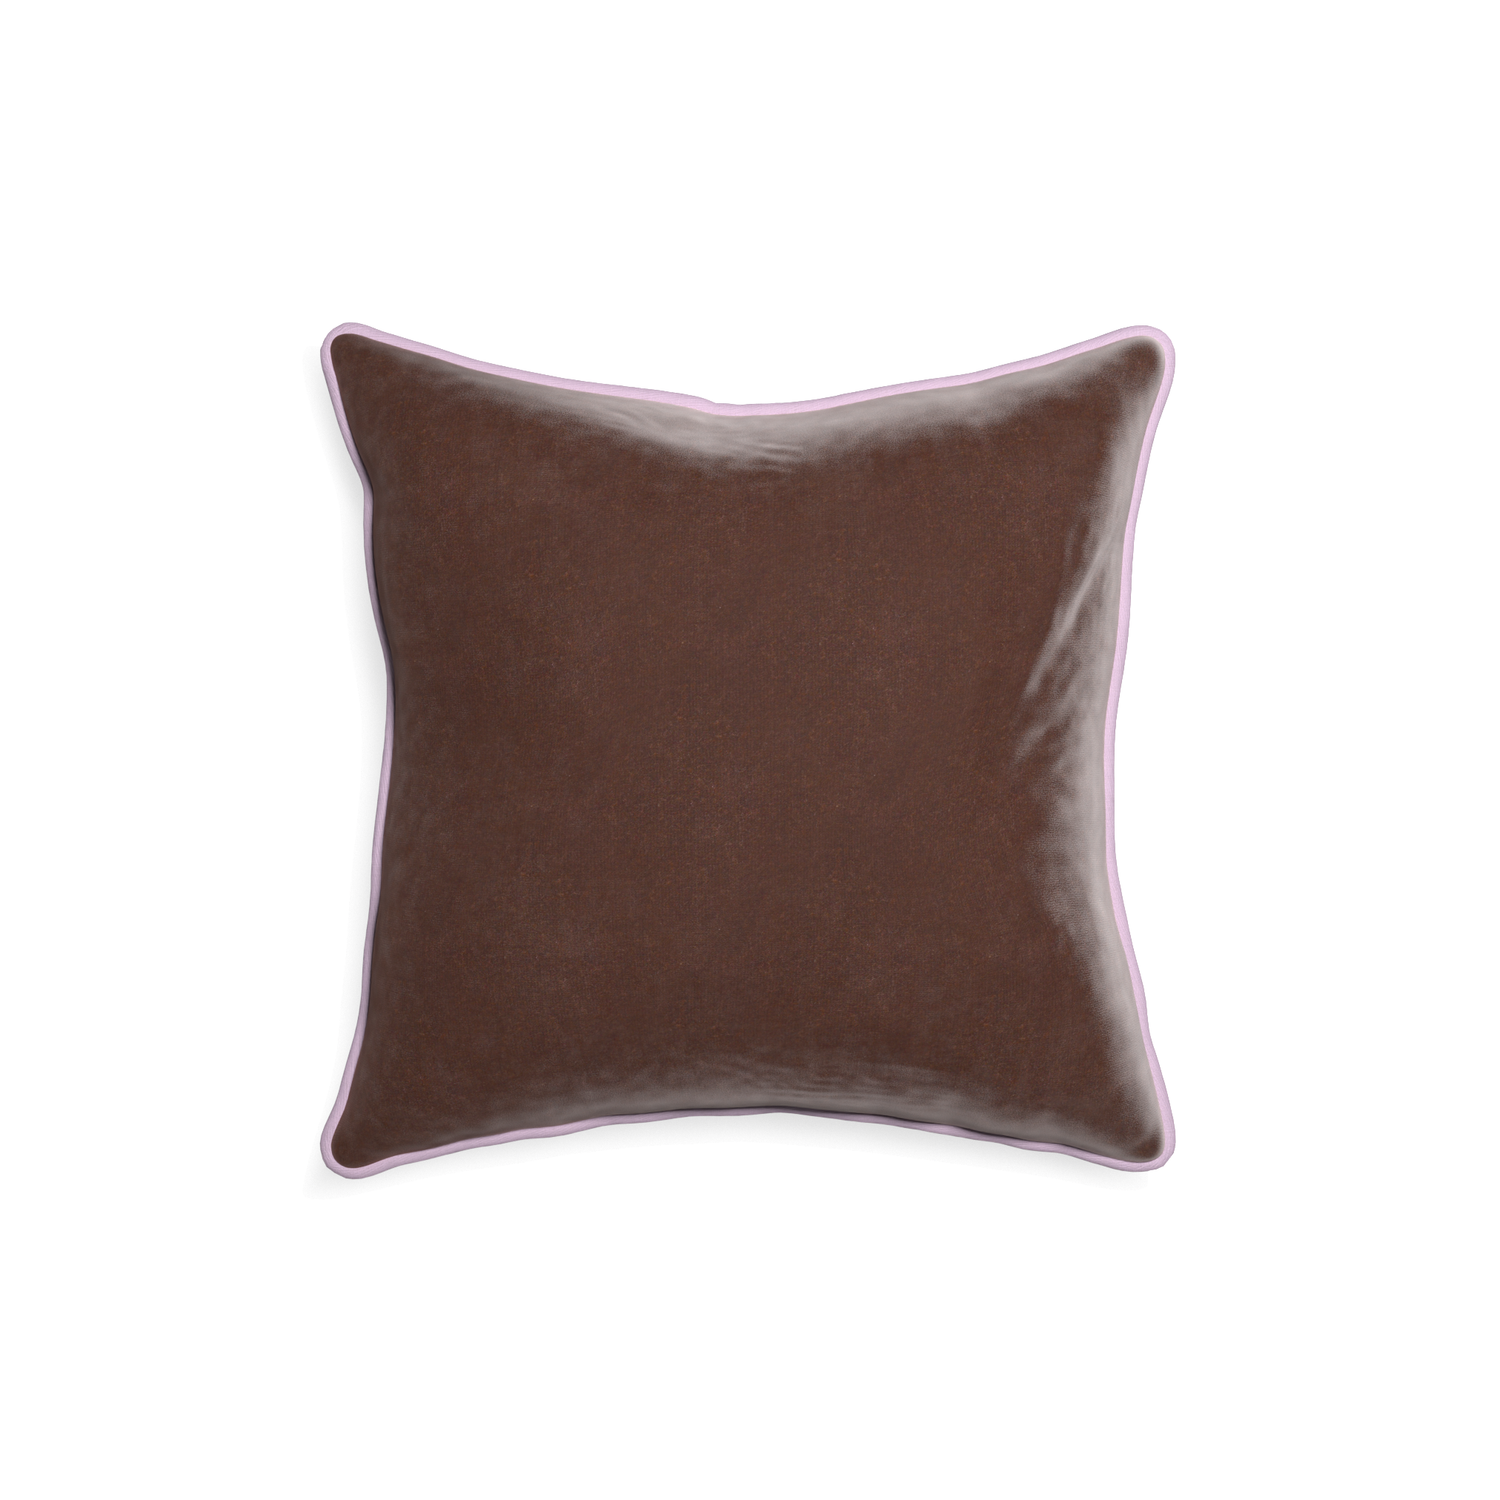 square brown velvet pillow with lilac piping